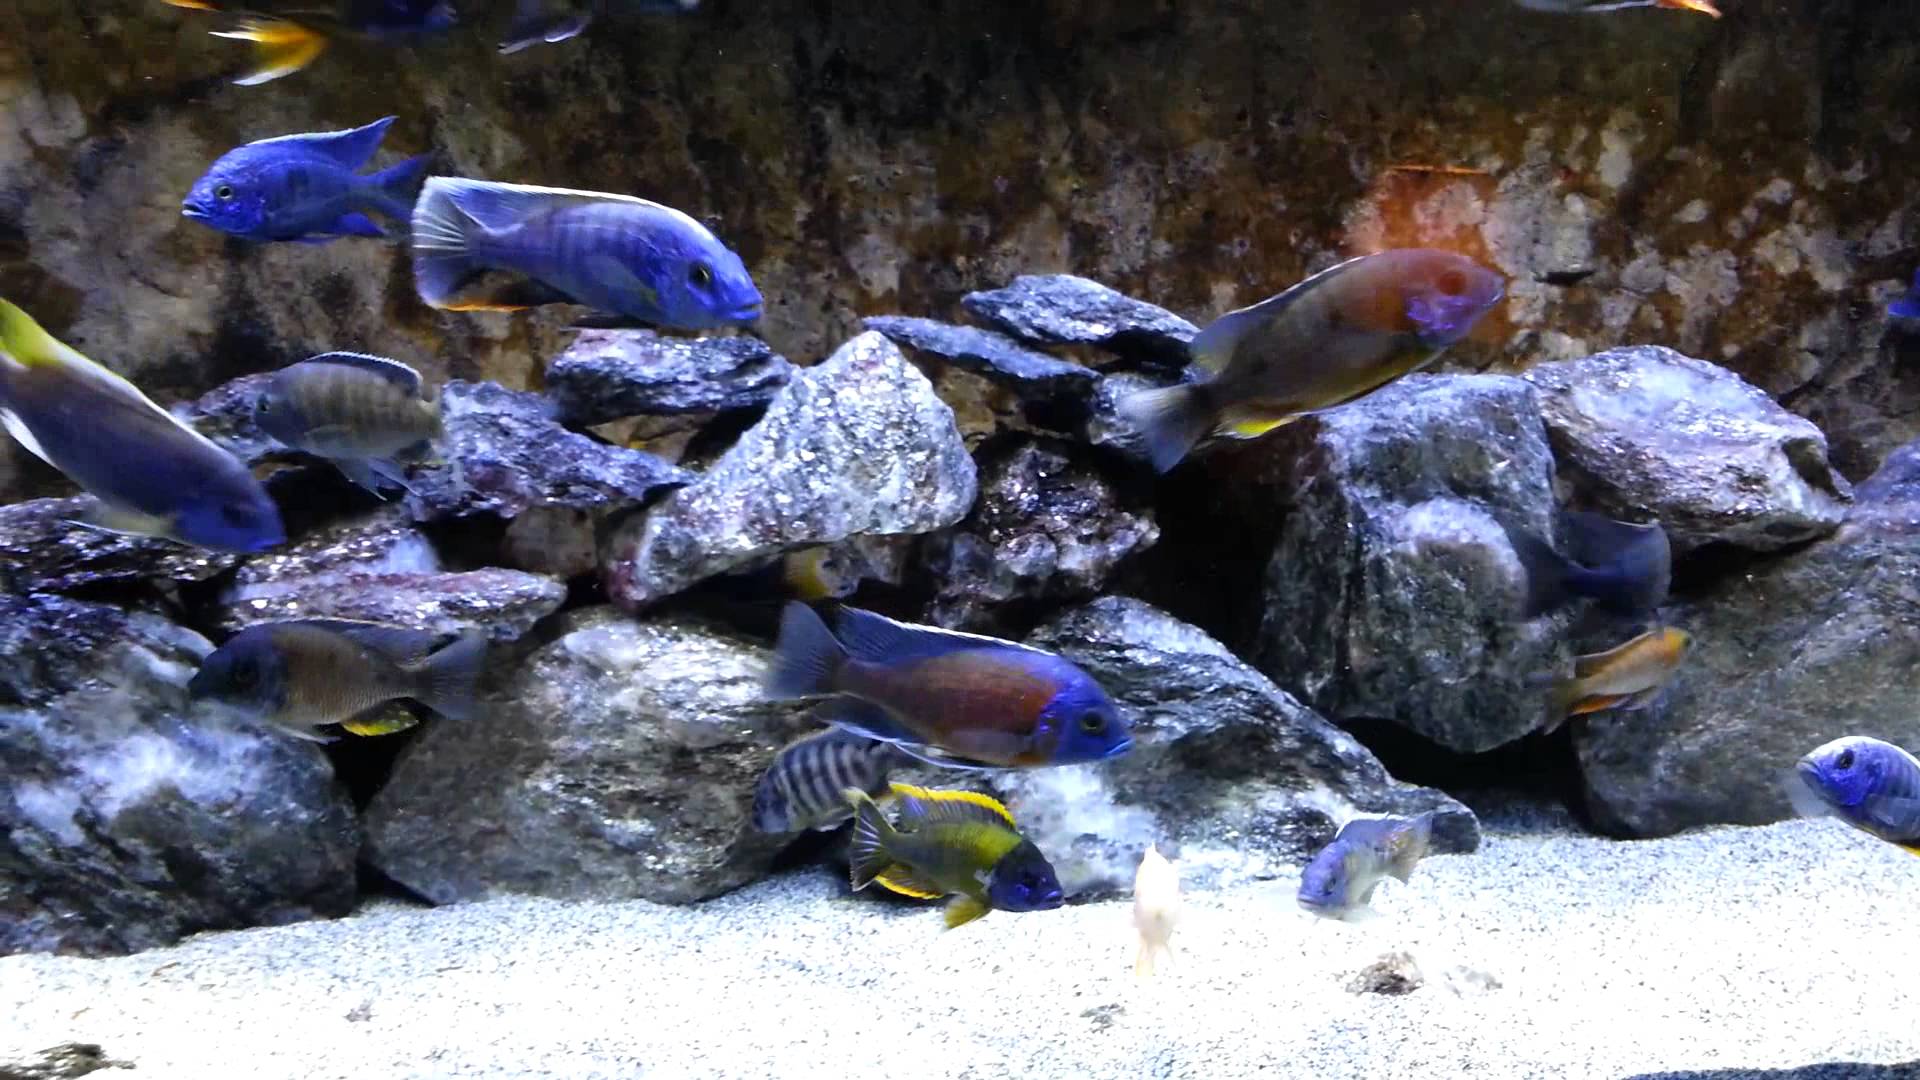 Back in the 120 show tank Lake Malawi cichlids